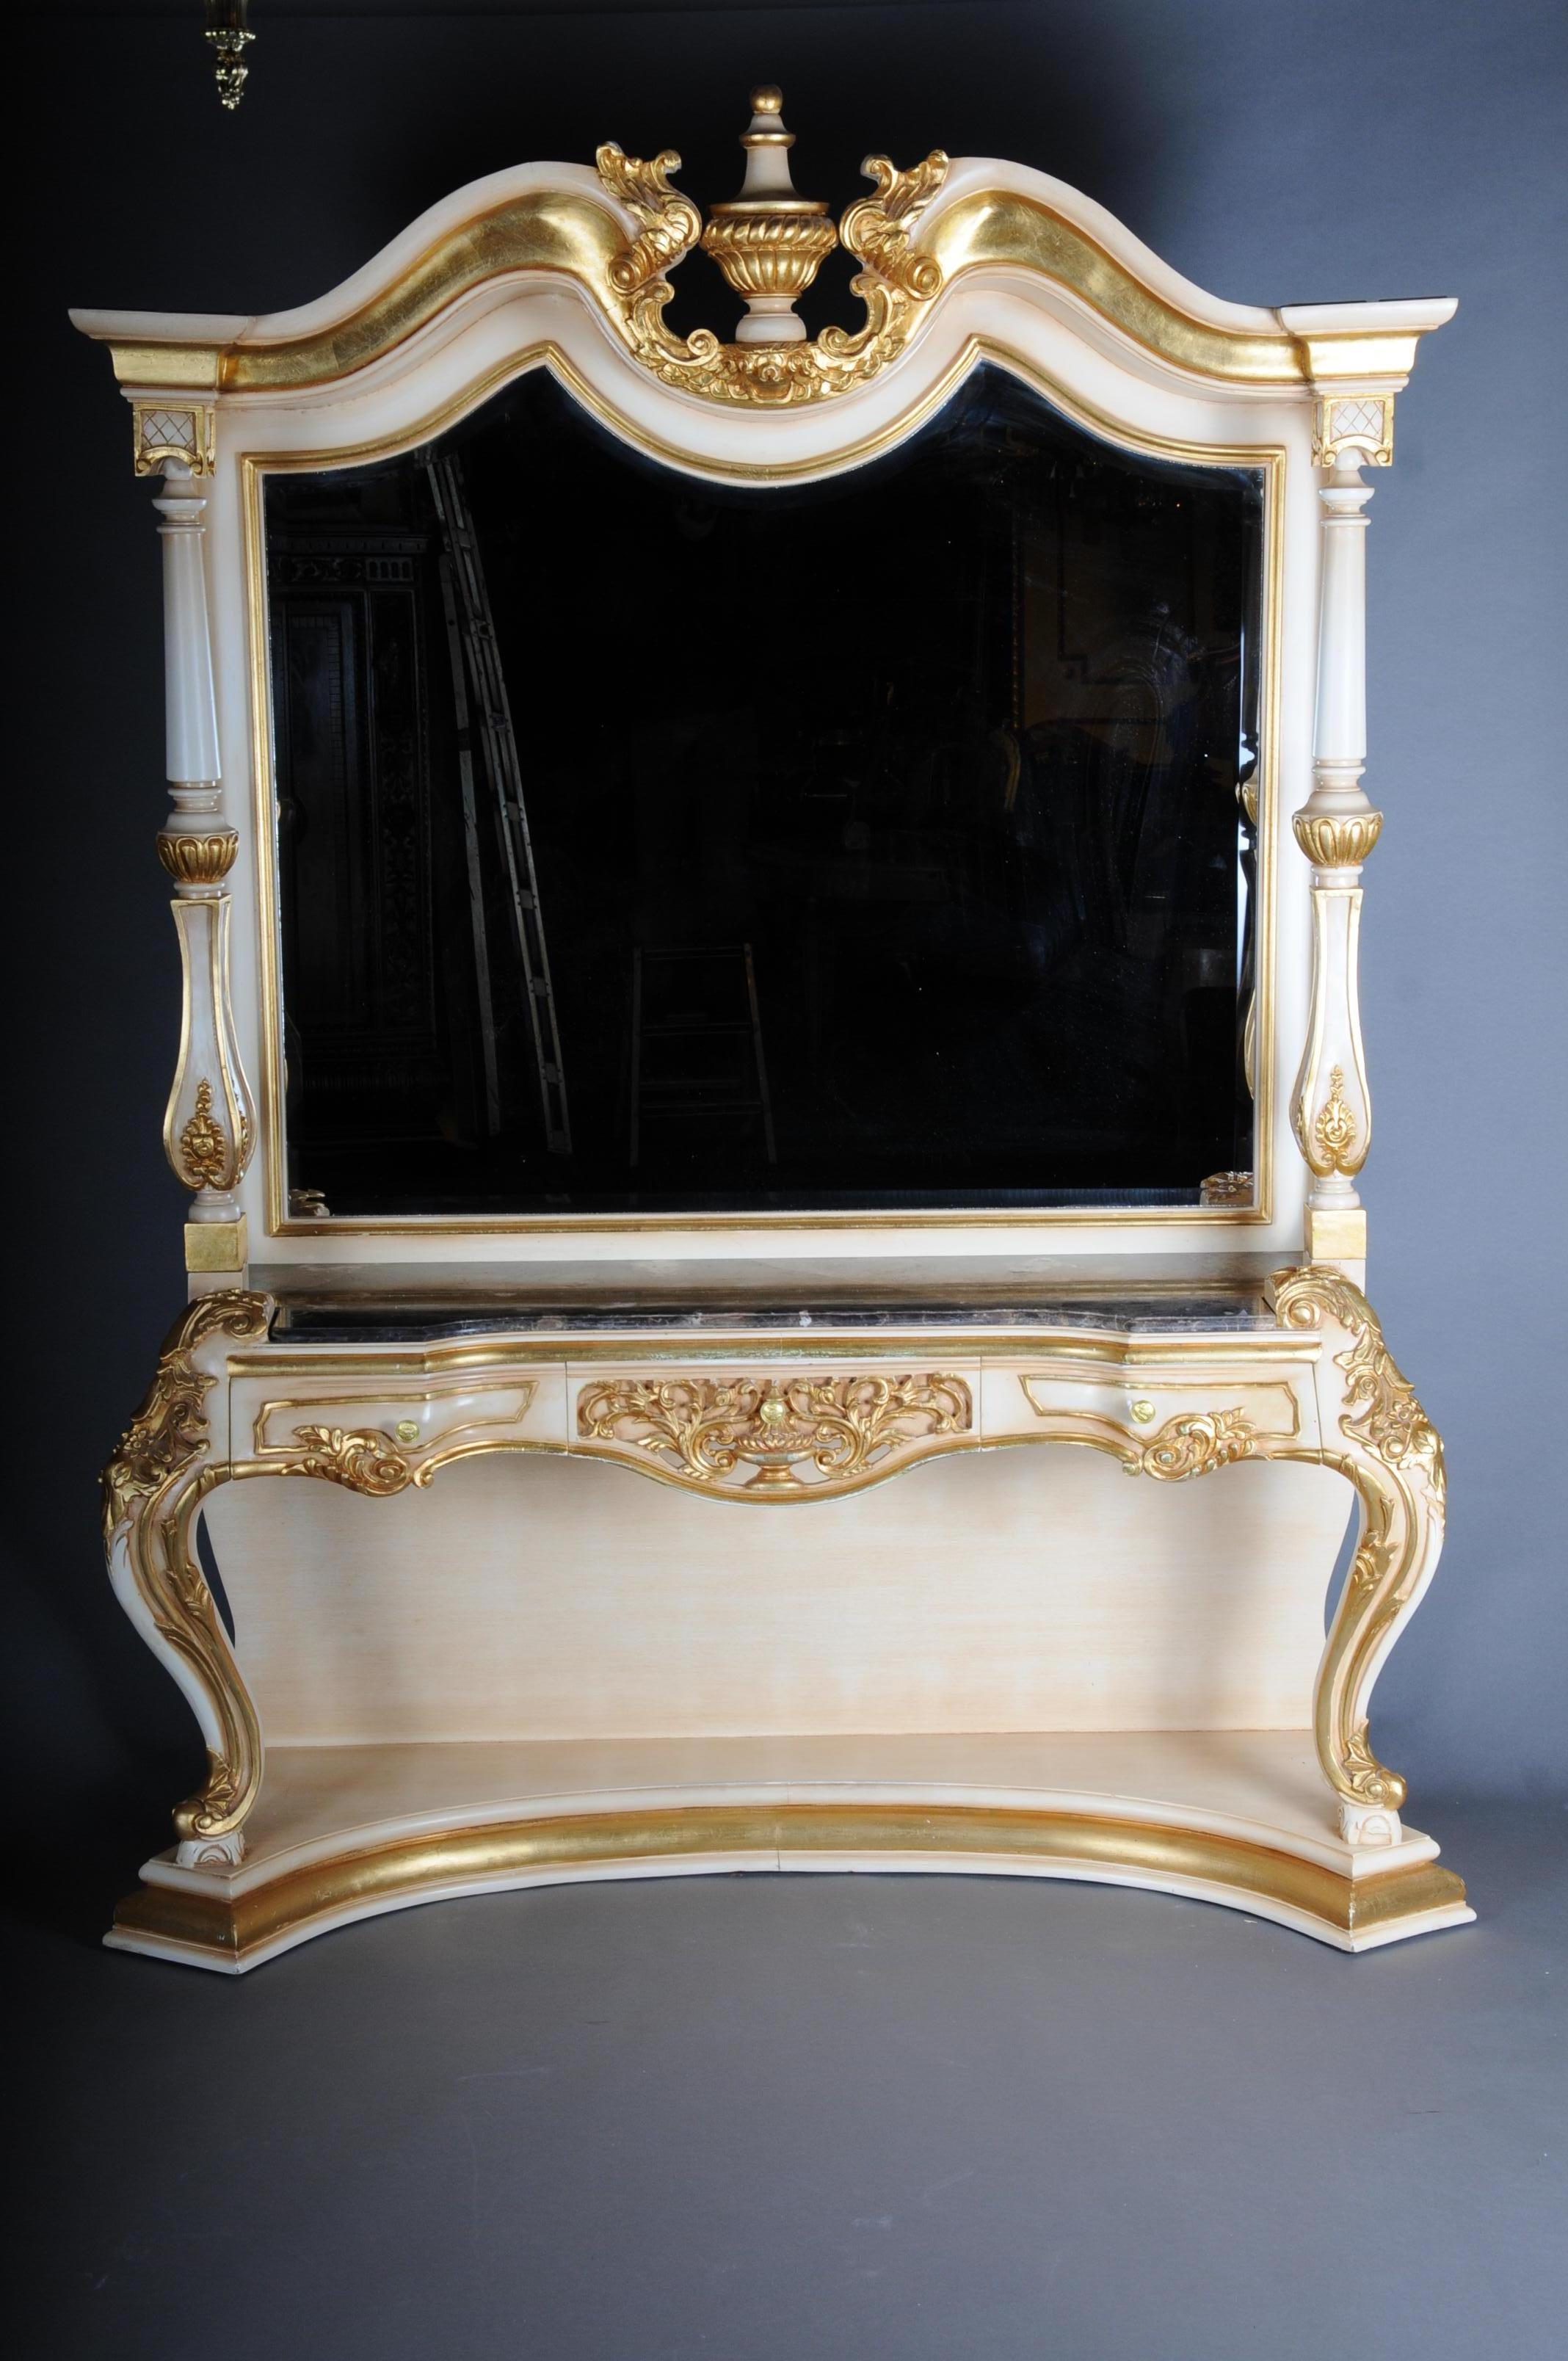 Magnificent sideboard / dresser / dressing table Baroque, 20th century

Body made of solid beechwood, finely carved, painted cream and gold-plated.
Chest of drawers flanked by full turned columns. With mottled marble top.
On curved,